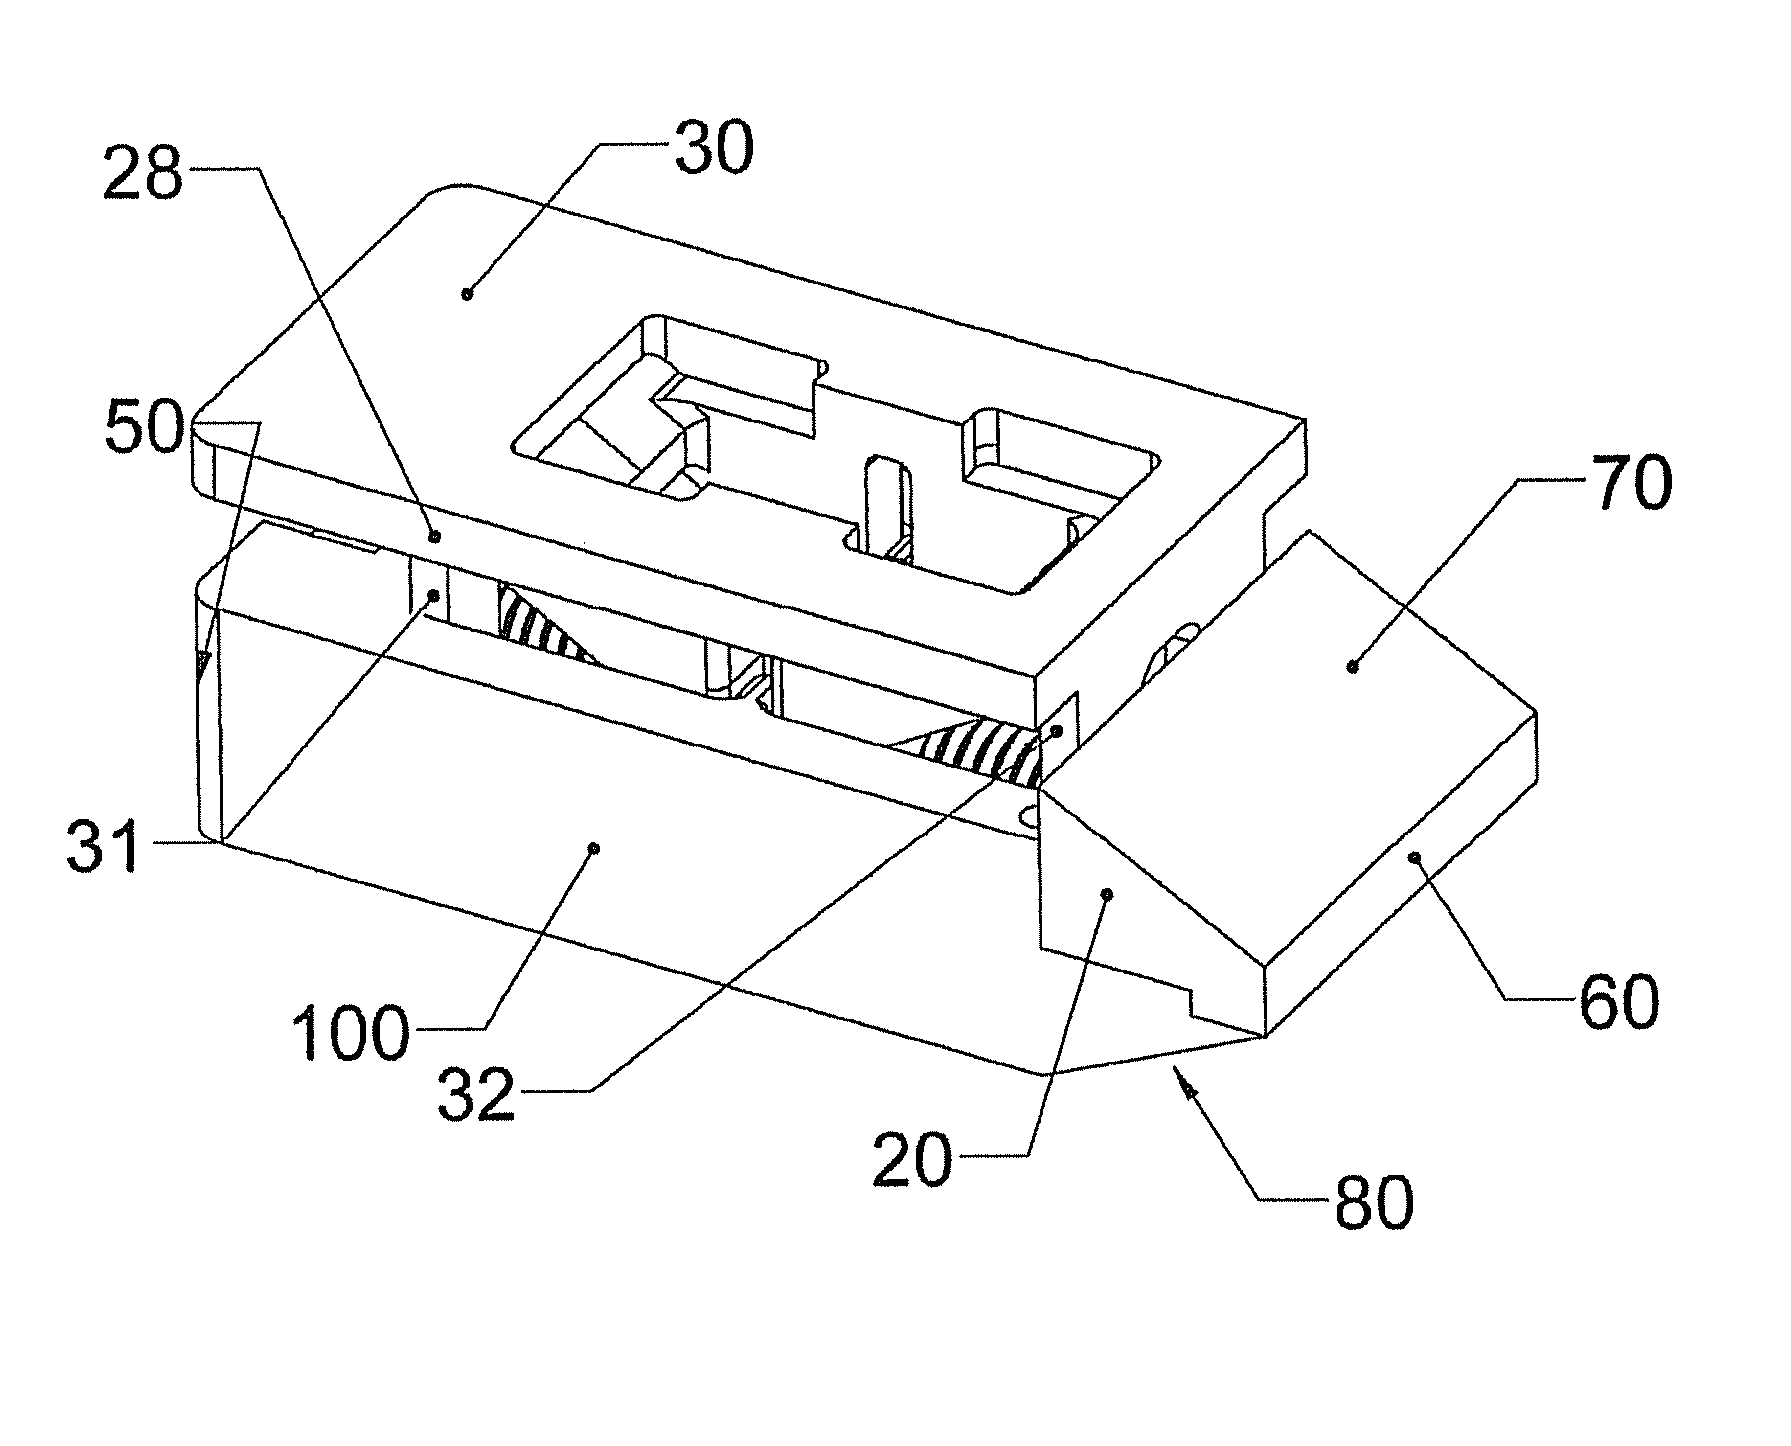 Expandable self-anchoring interbody cage for orthopedic applications